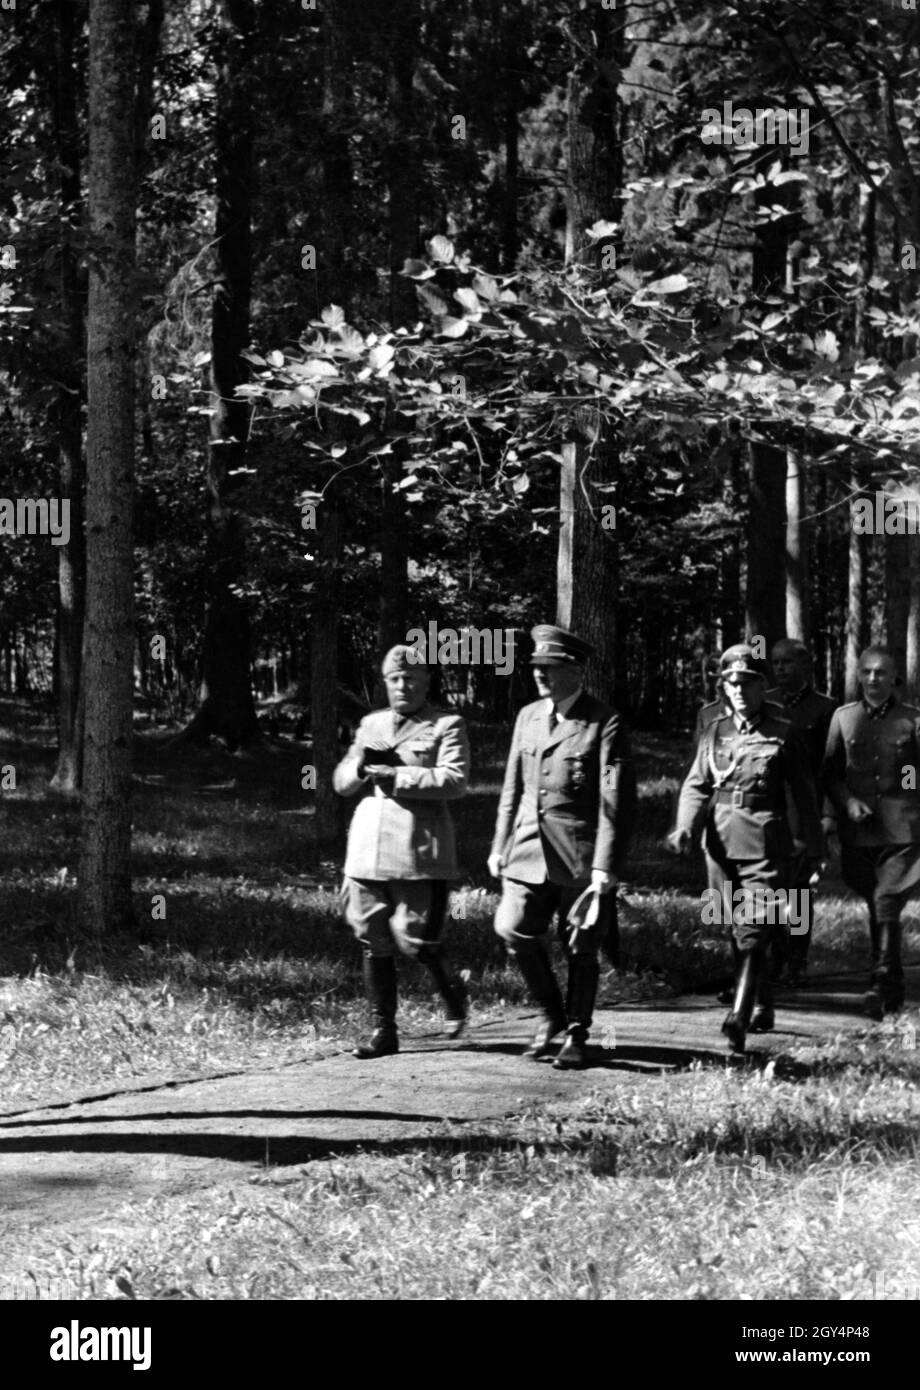 Mussolini, Hitler and Schmundt at the Führer's headquarters at Wolfsschanze near Ketrzyn in Poland. [automated translation] Stock Photo